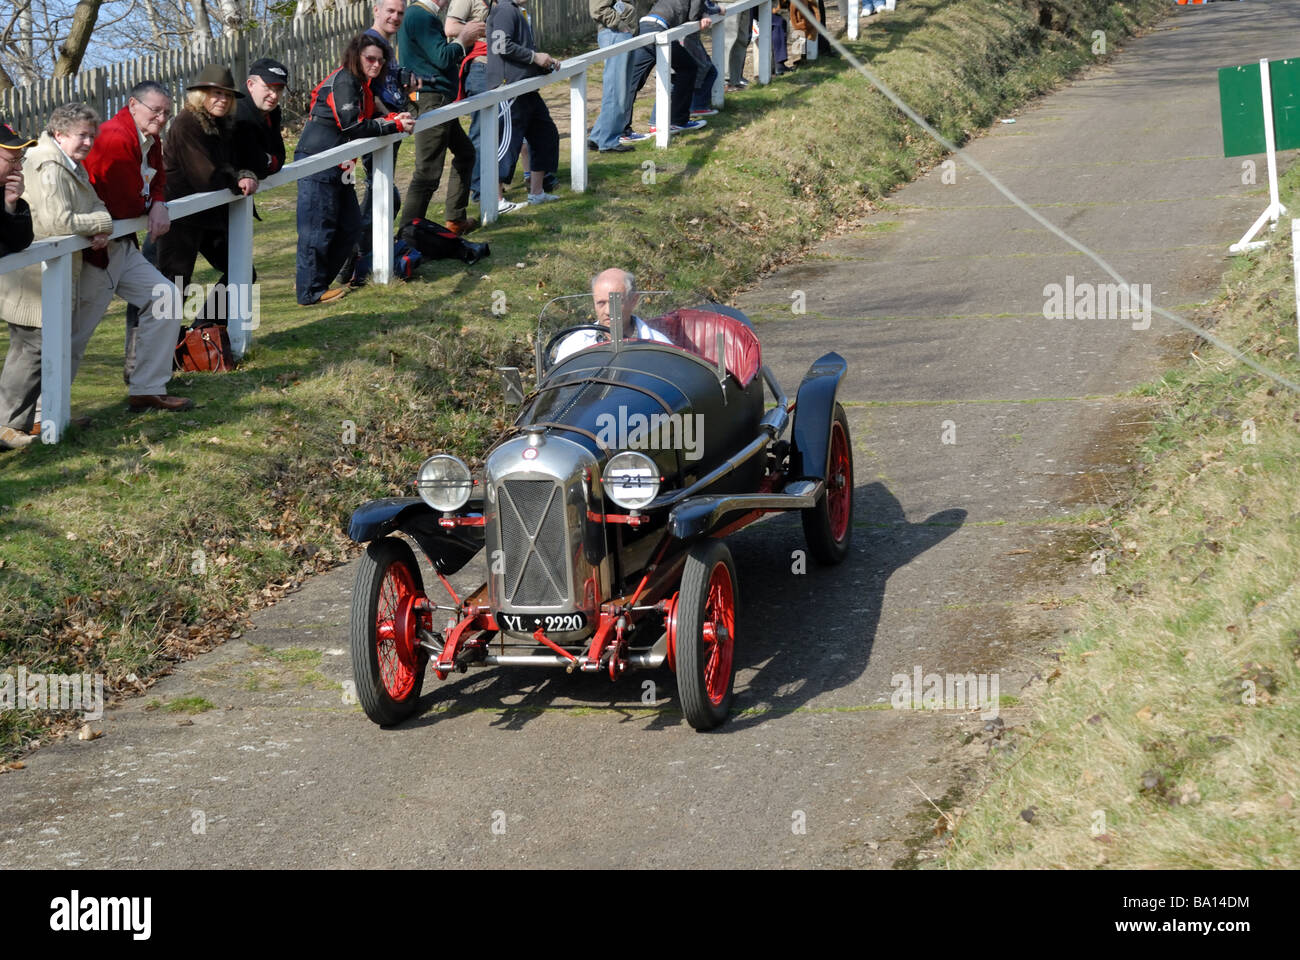 YL 2220 a 1925 Salmson Gran Sport Brooklands Museum Trust descending at speed on the Brooklands Museum Test Hill Challenge Stock Photo